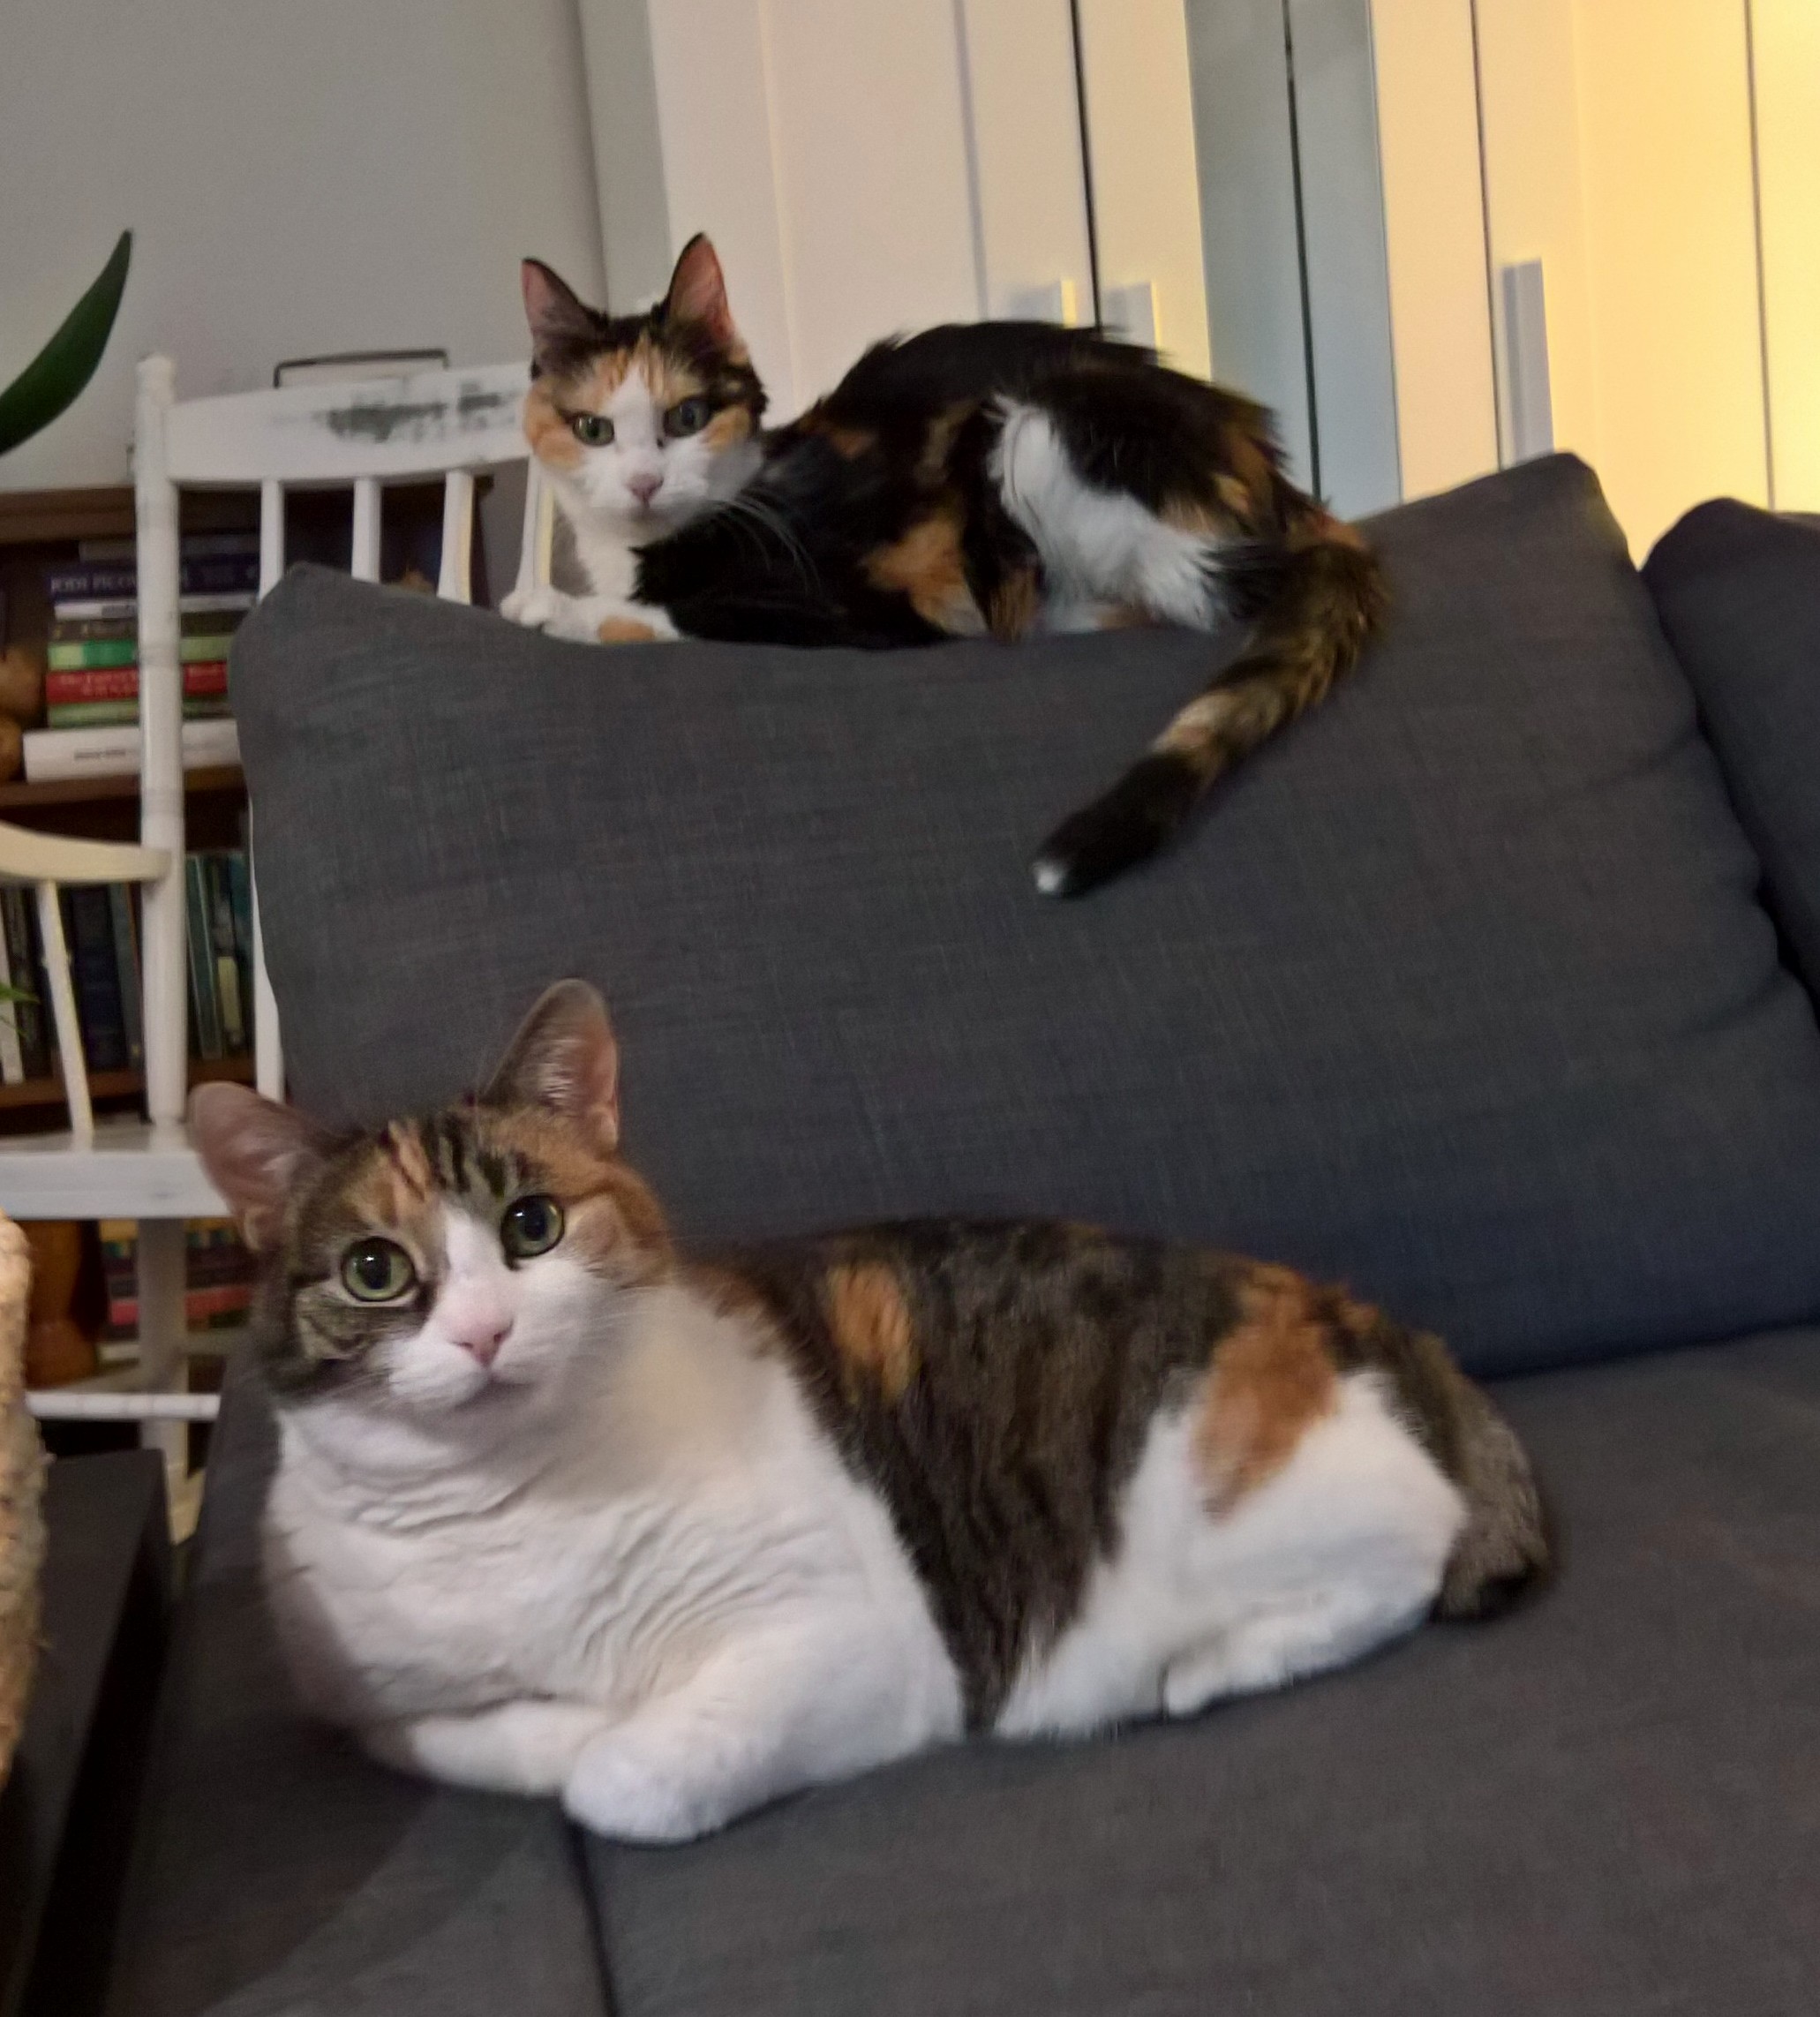 Skinny cat and fat cat sharing a rare moment of tranquility